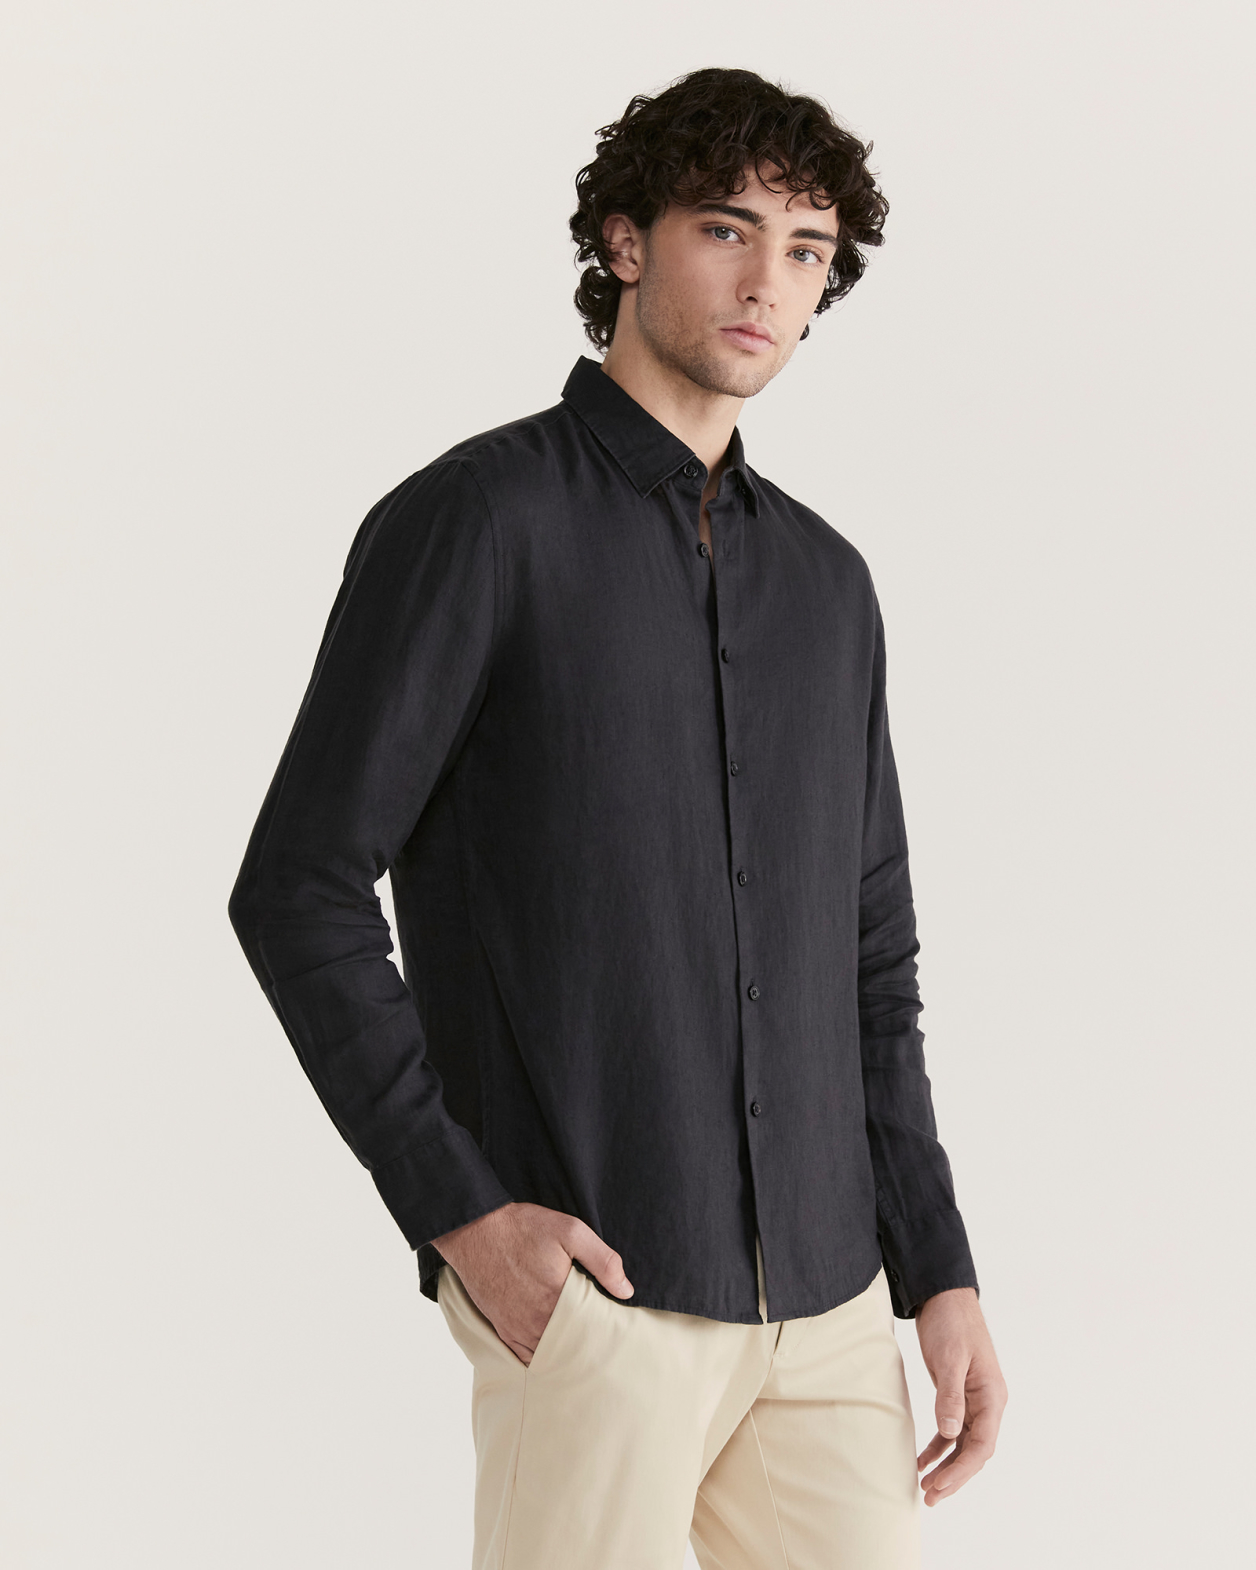 Anderson Long Sleeve Classic Linen Shirt in WASHED BLACK